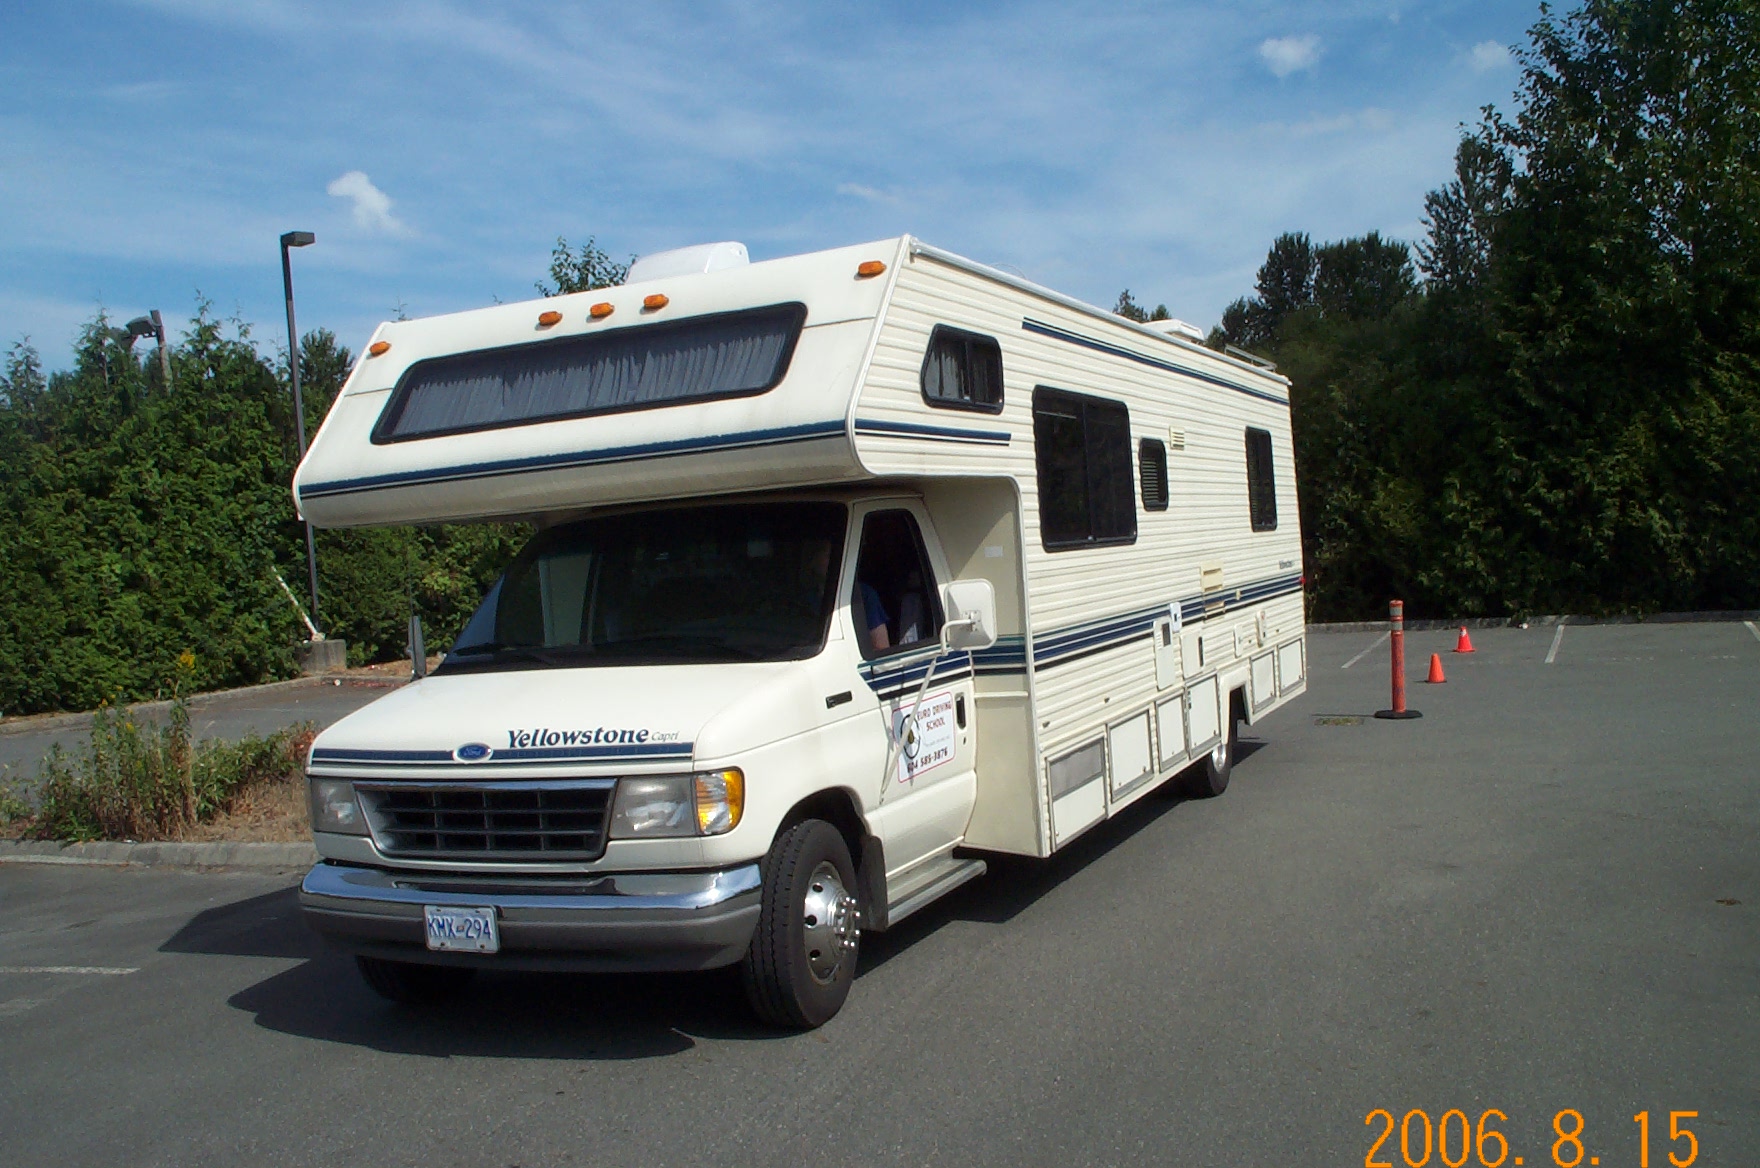 Backing up with a Class C Motorhome